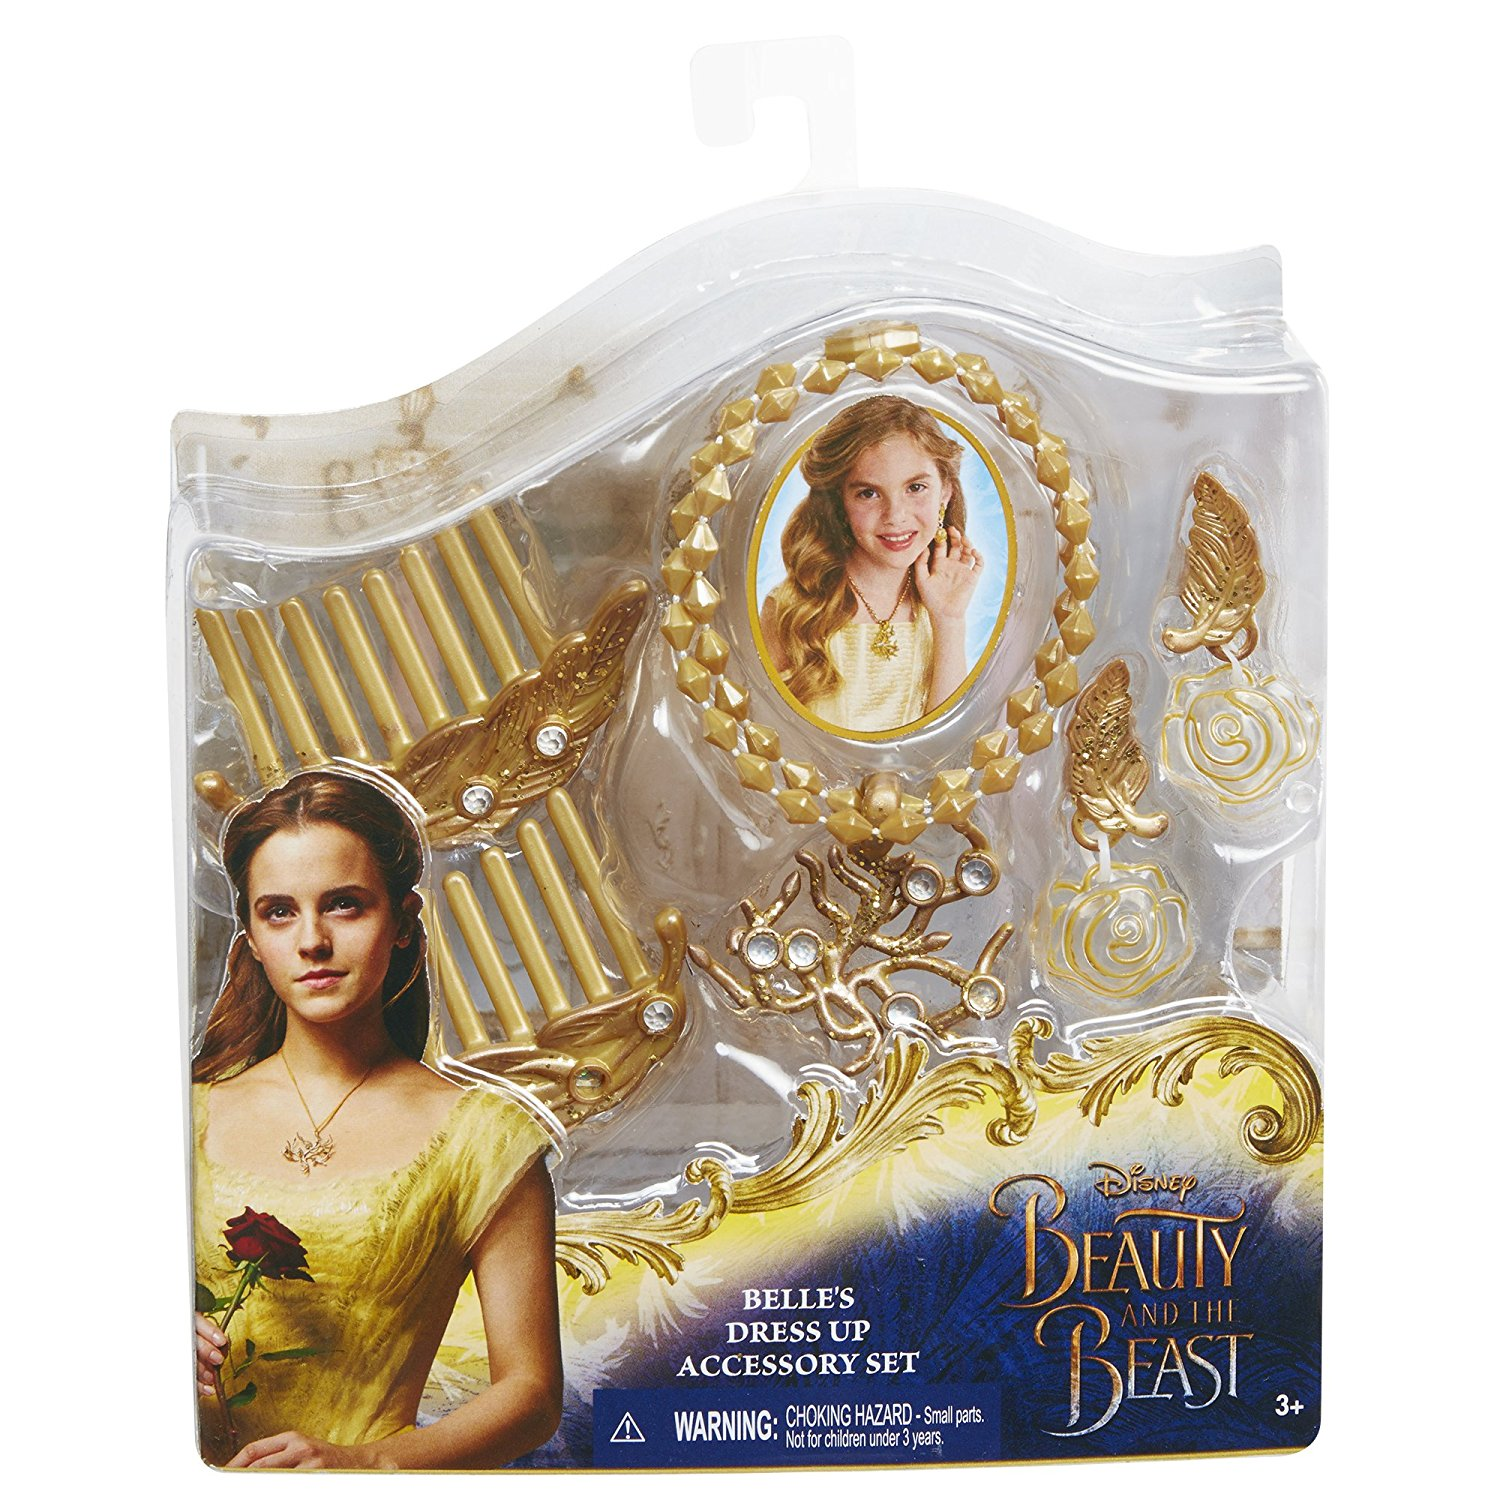 Disney Beauty & The Beast Live Action Belle’s Dress Up Accessory Set Just $7.99!